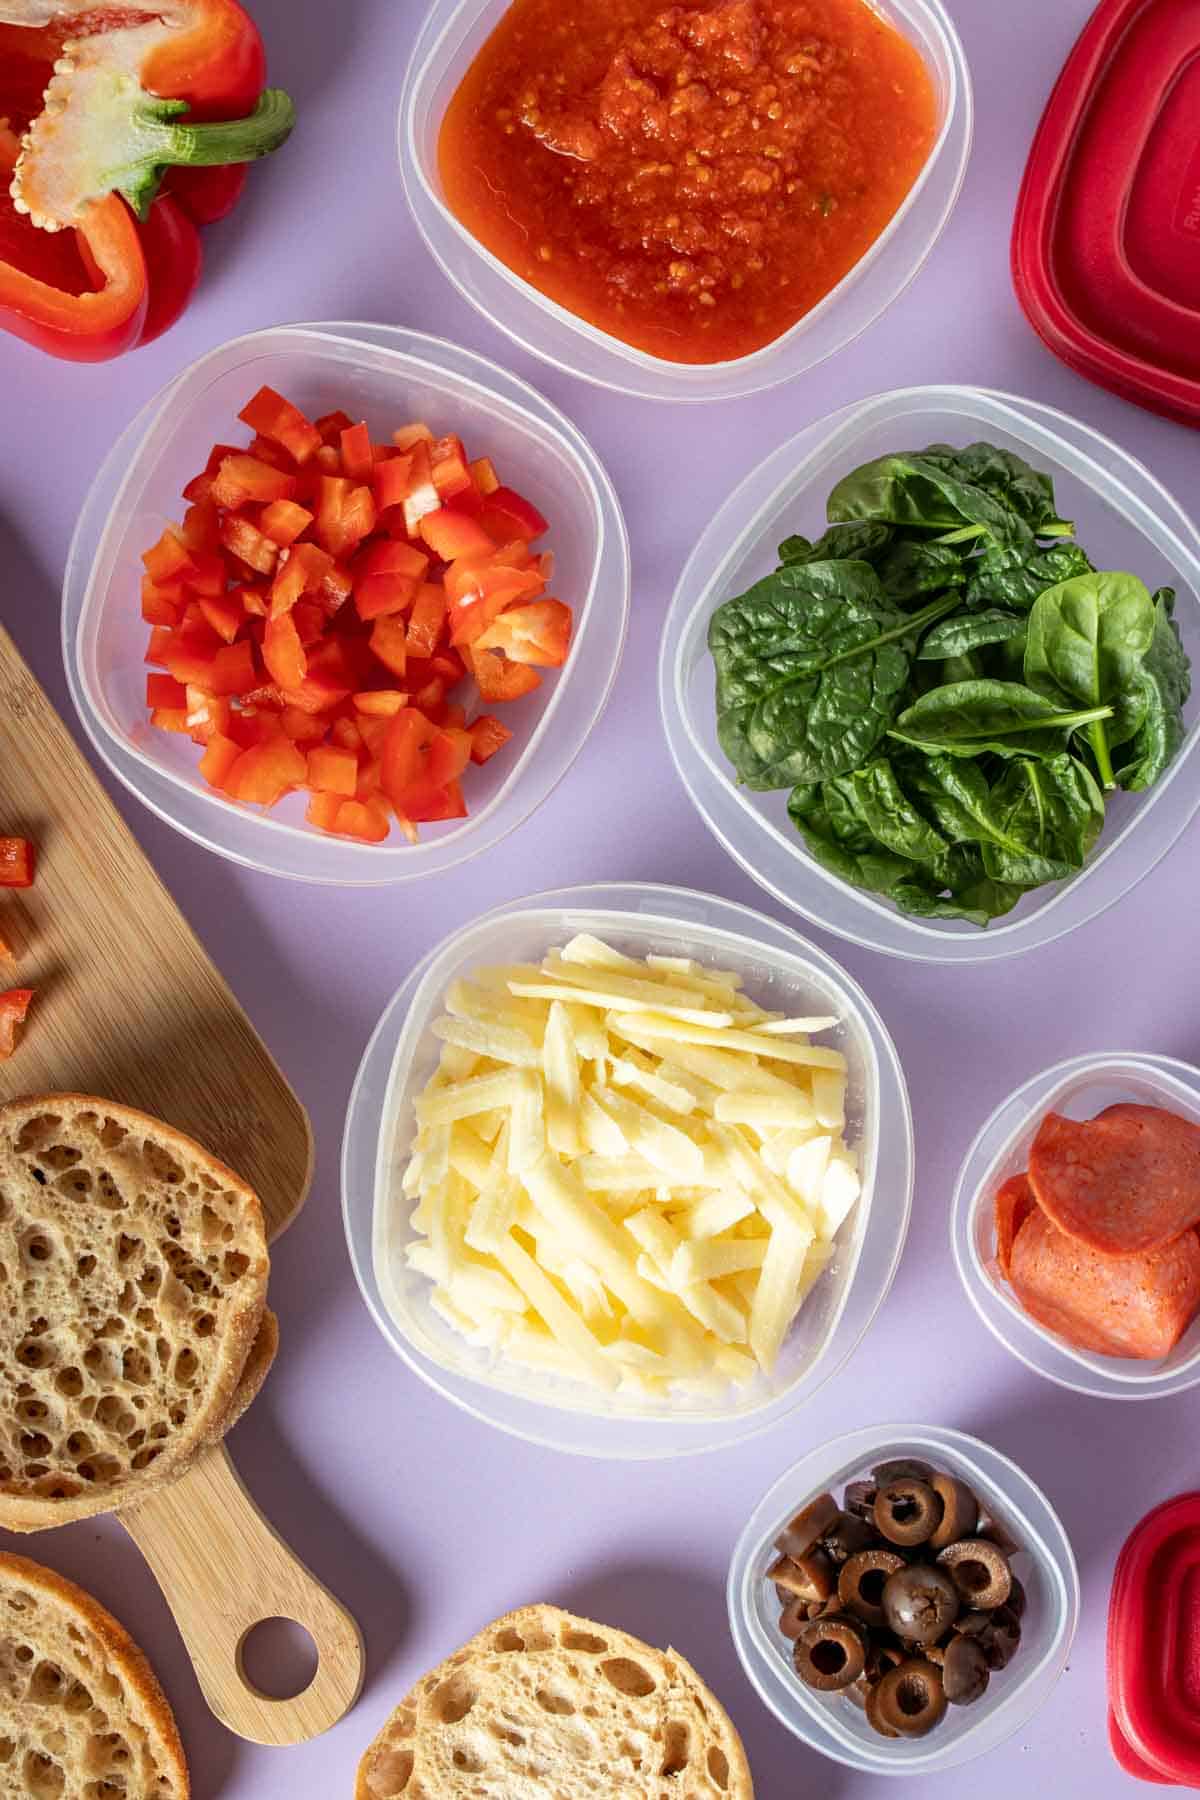 Plastic containers filled with ingredients and toppings for English muffin pizzas and the English muffins next to them.